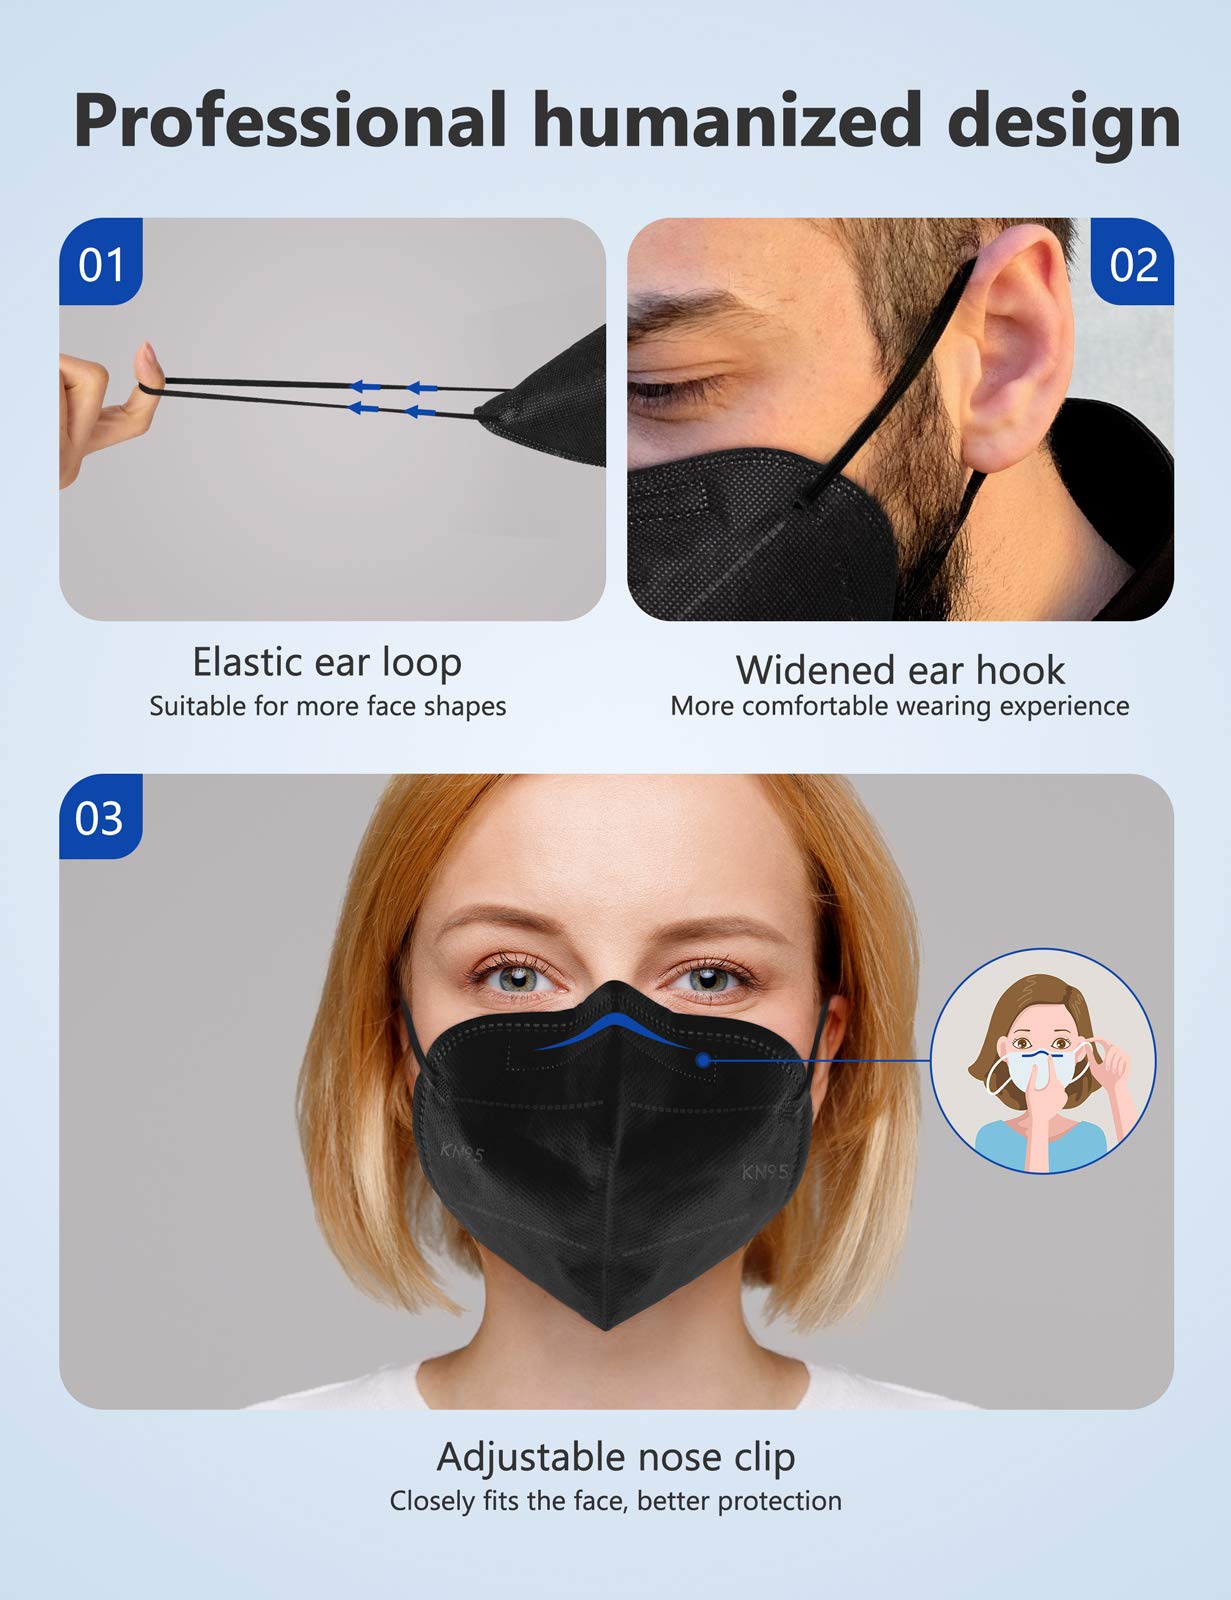 Boncare KN95 Face Mask 30 PCs, 5-Layer Black Face Mask for Men & Women Filter Efficiency≥ 95%, Breathable and Comfortable, Black